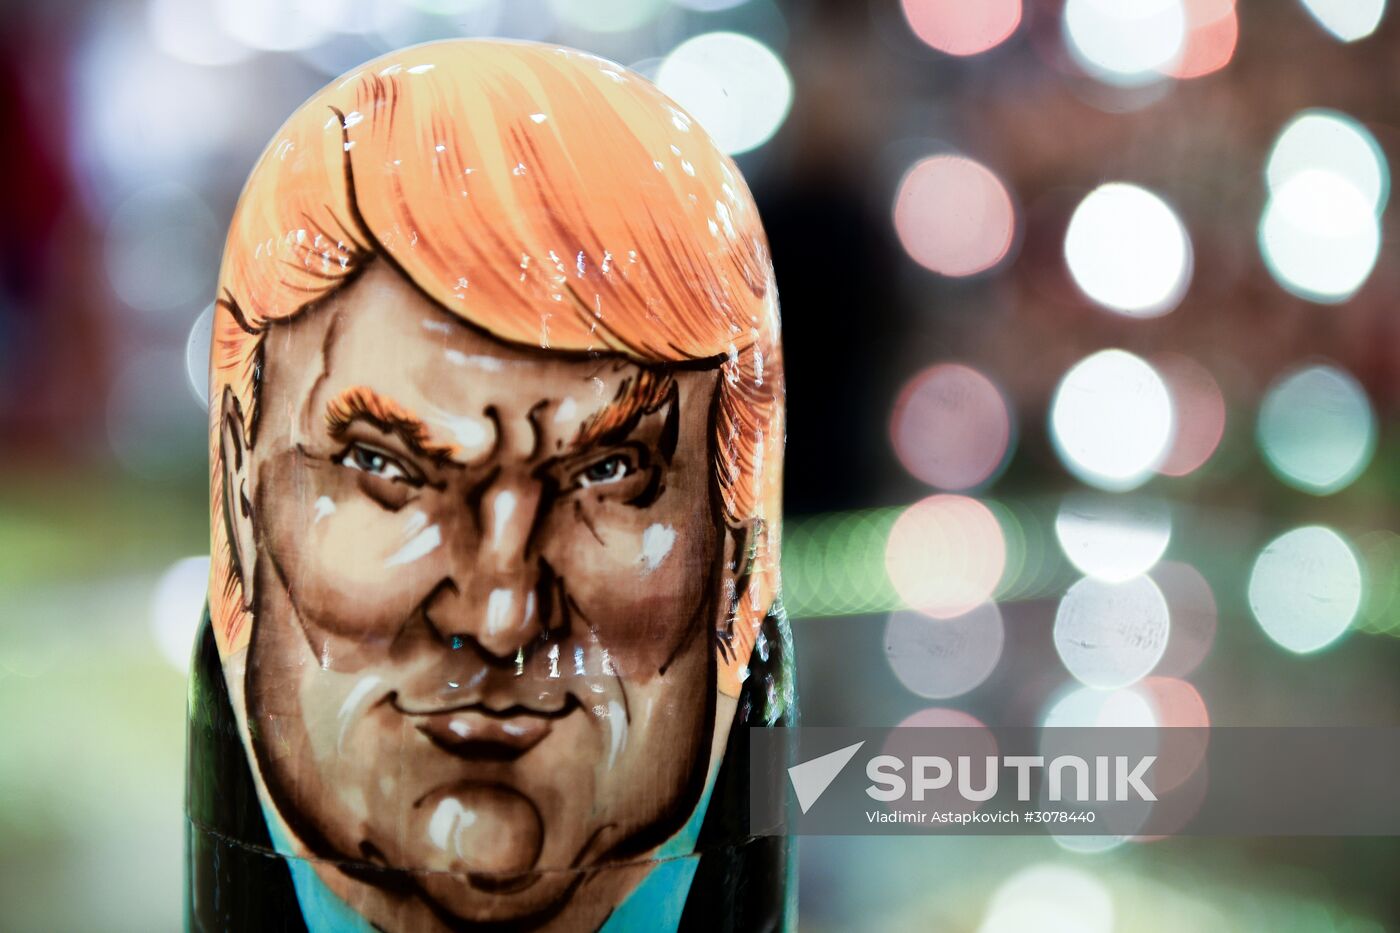 Trump-face matryoshka dolls are sold in Moscow